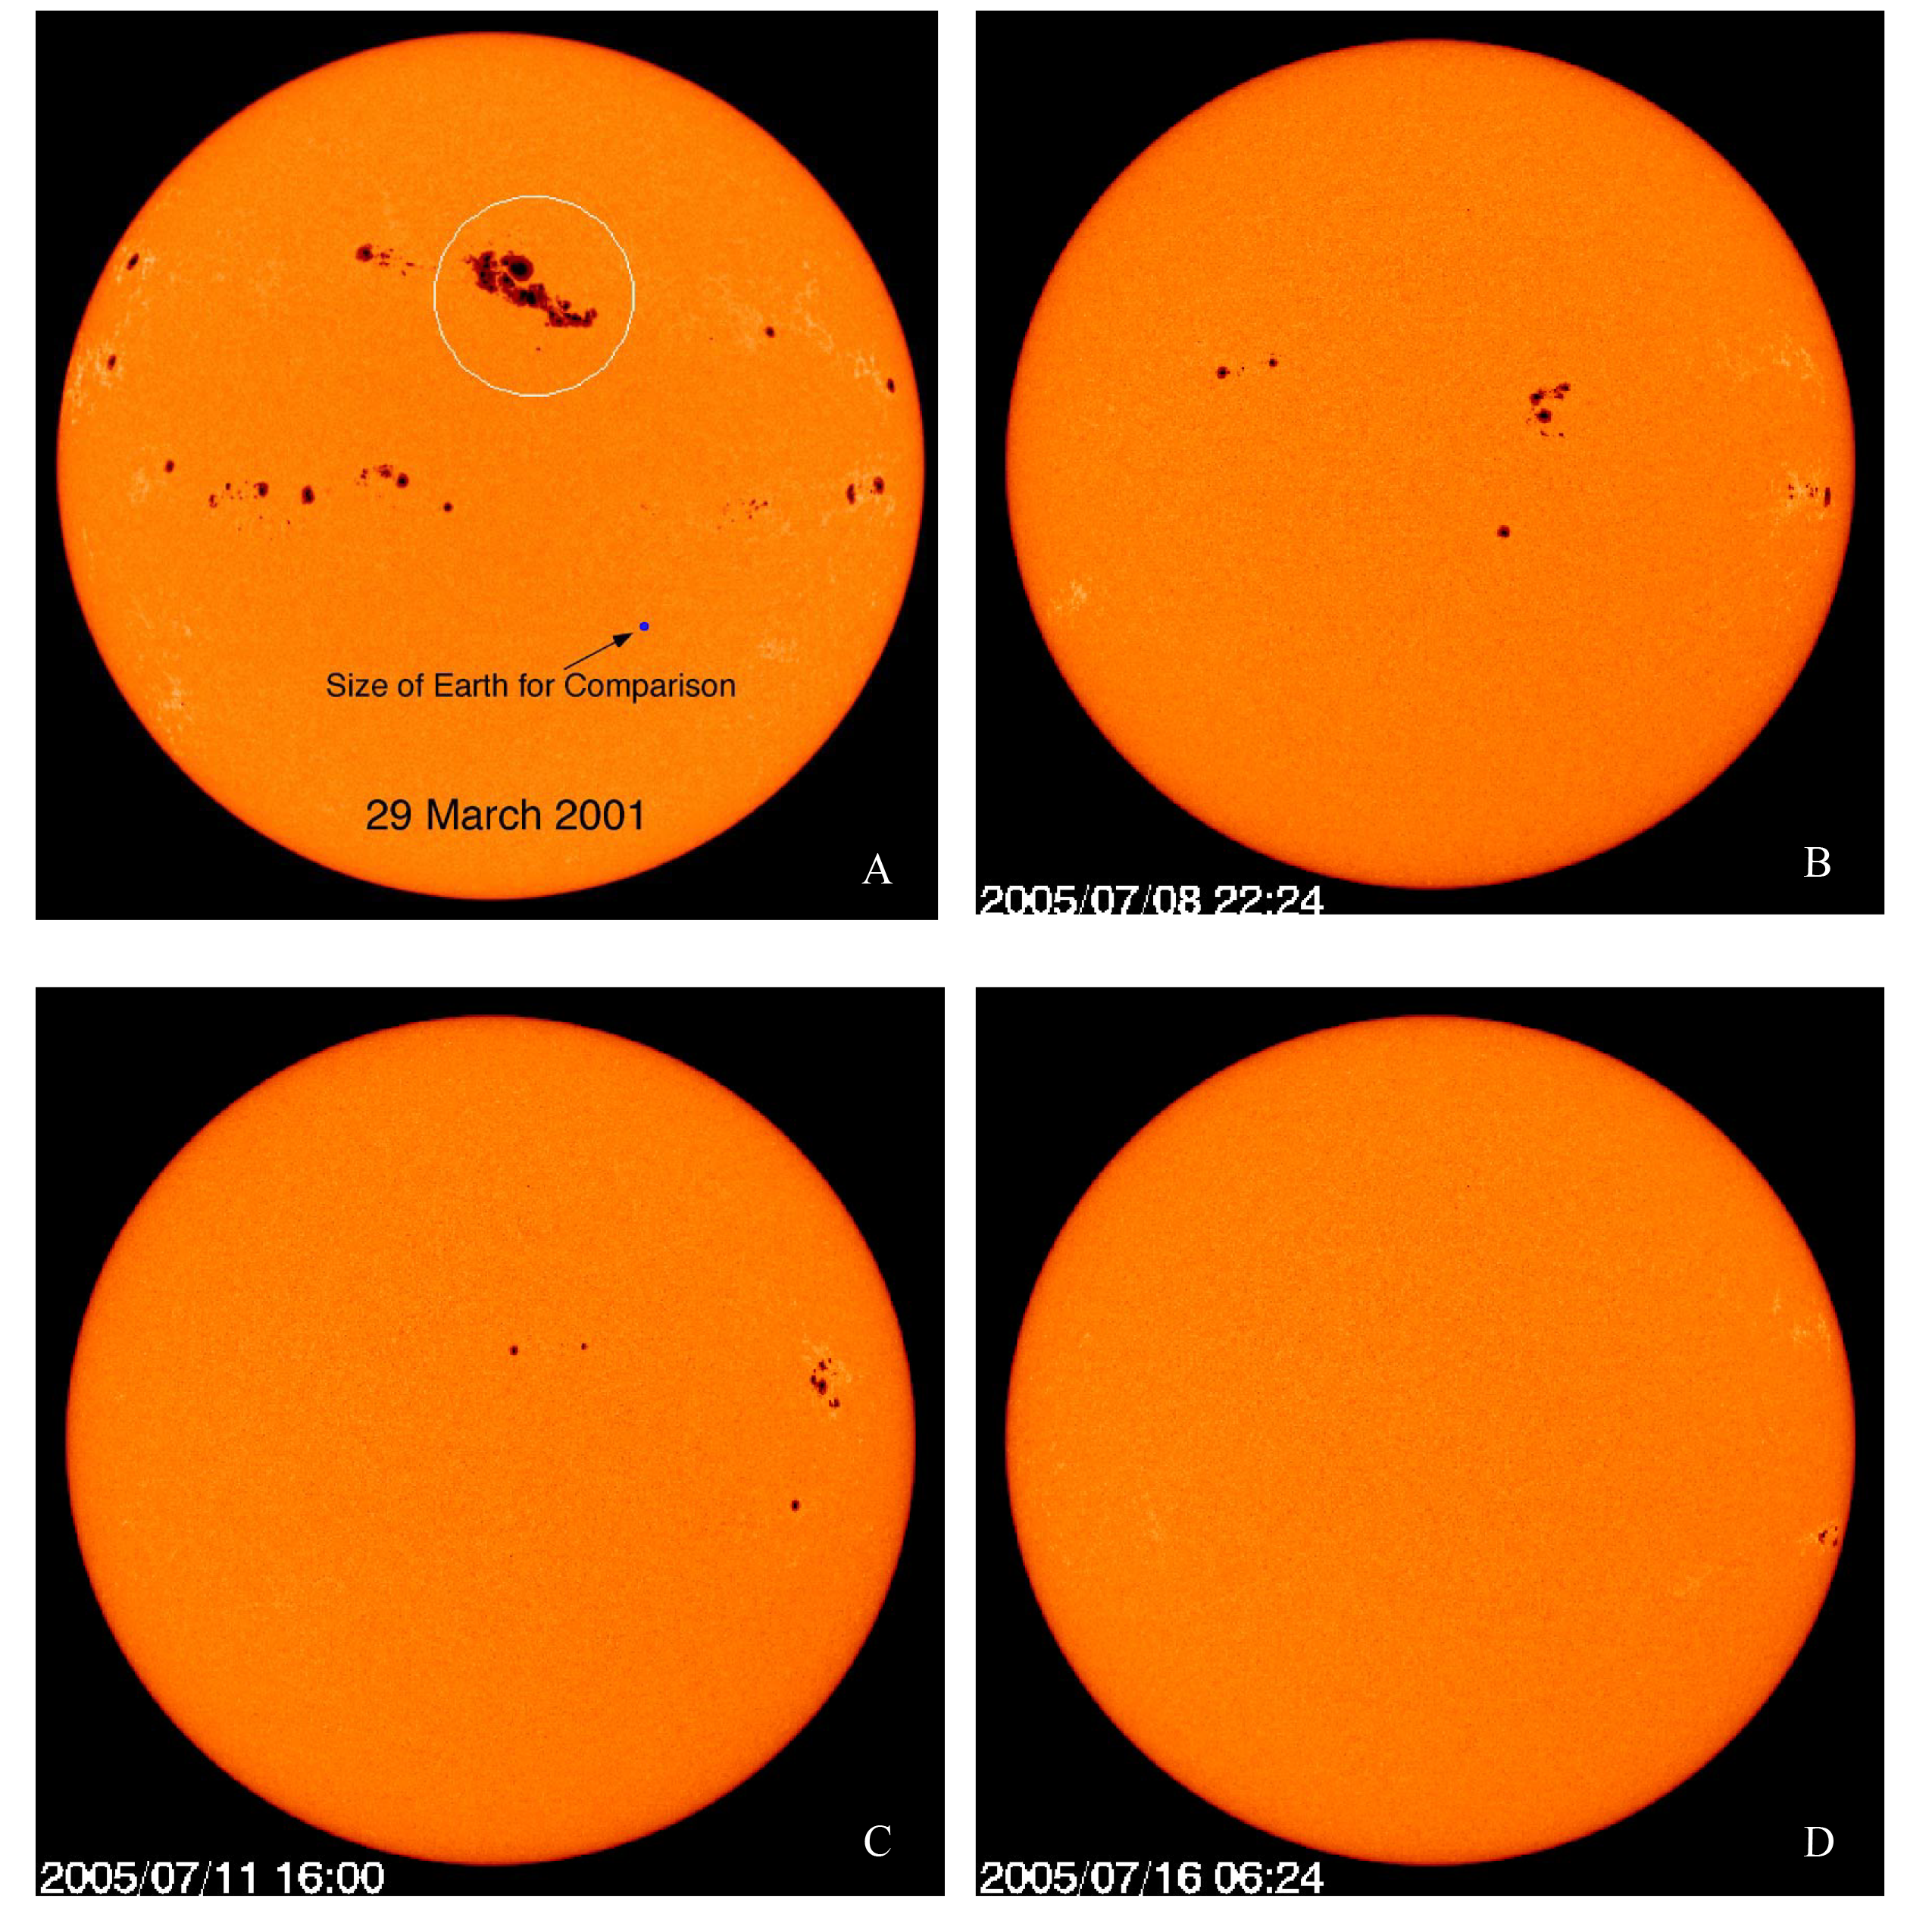 This is four images of the Sun, all taken in 2005, that show the changing number and location of sunspots. The number of sunspots decreases throughout the year, with the first image from March showing the most sunspots, and the last image from August showing almost none.